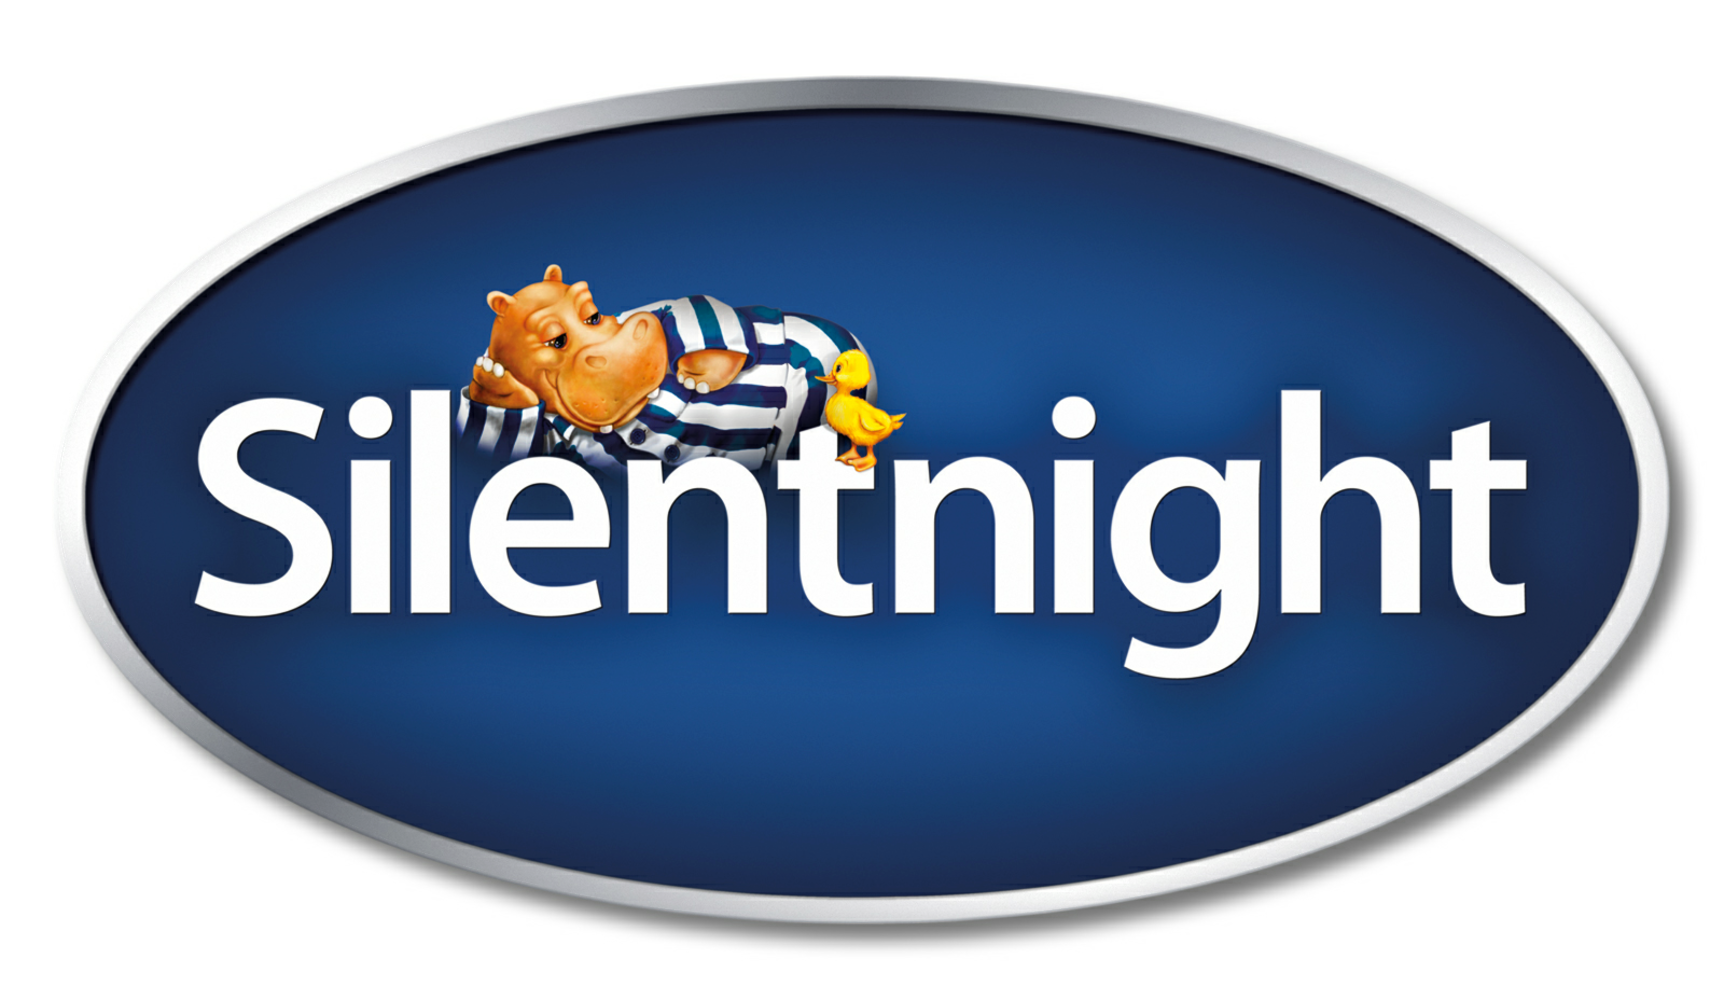 Silent Night Bedding, Duvets, Toppers, Pillows